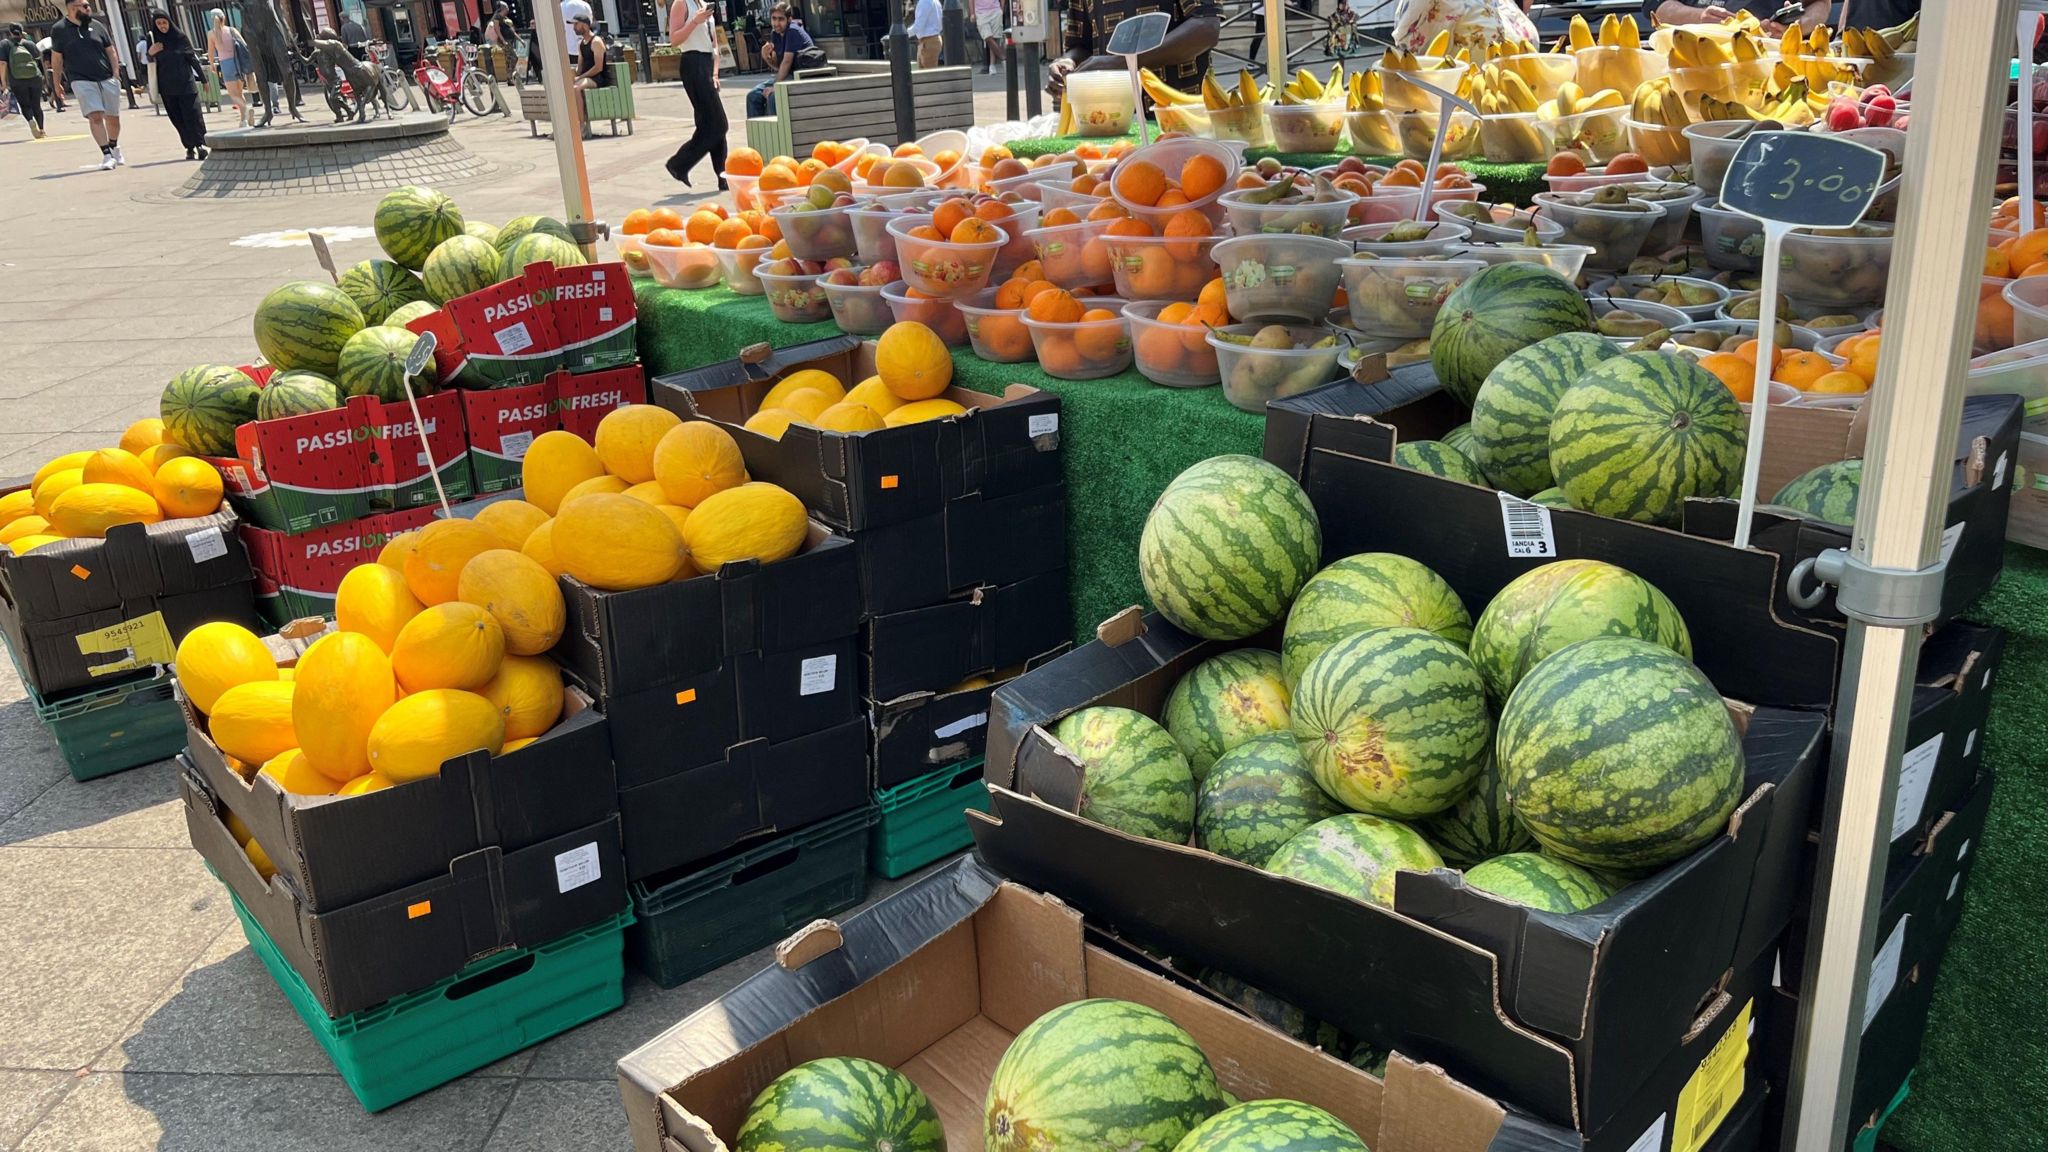 A fruit stall in Uxbridge displaying large boxes containing watermelons and yellow honeydew melons along the pavement. On the table there are several bowls containing oranges, pears and bananas.